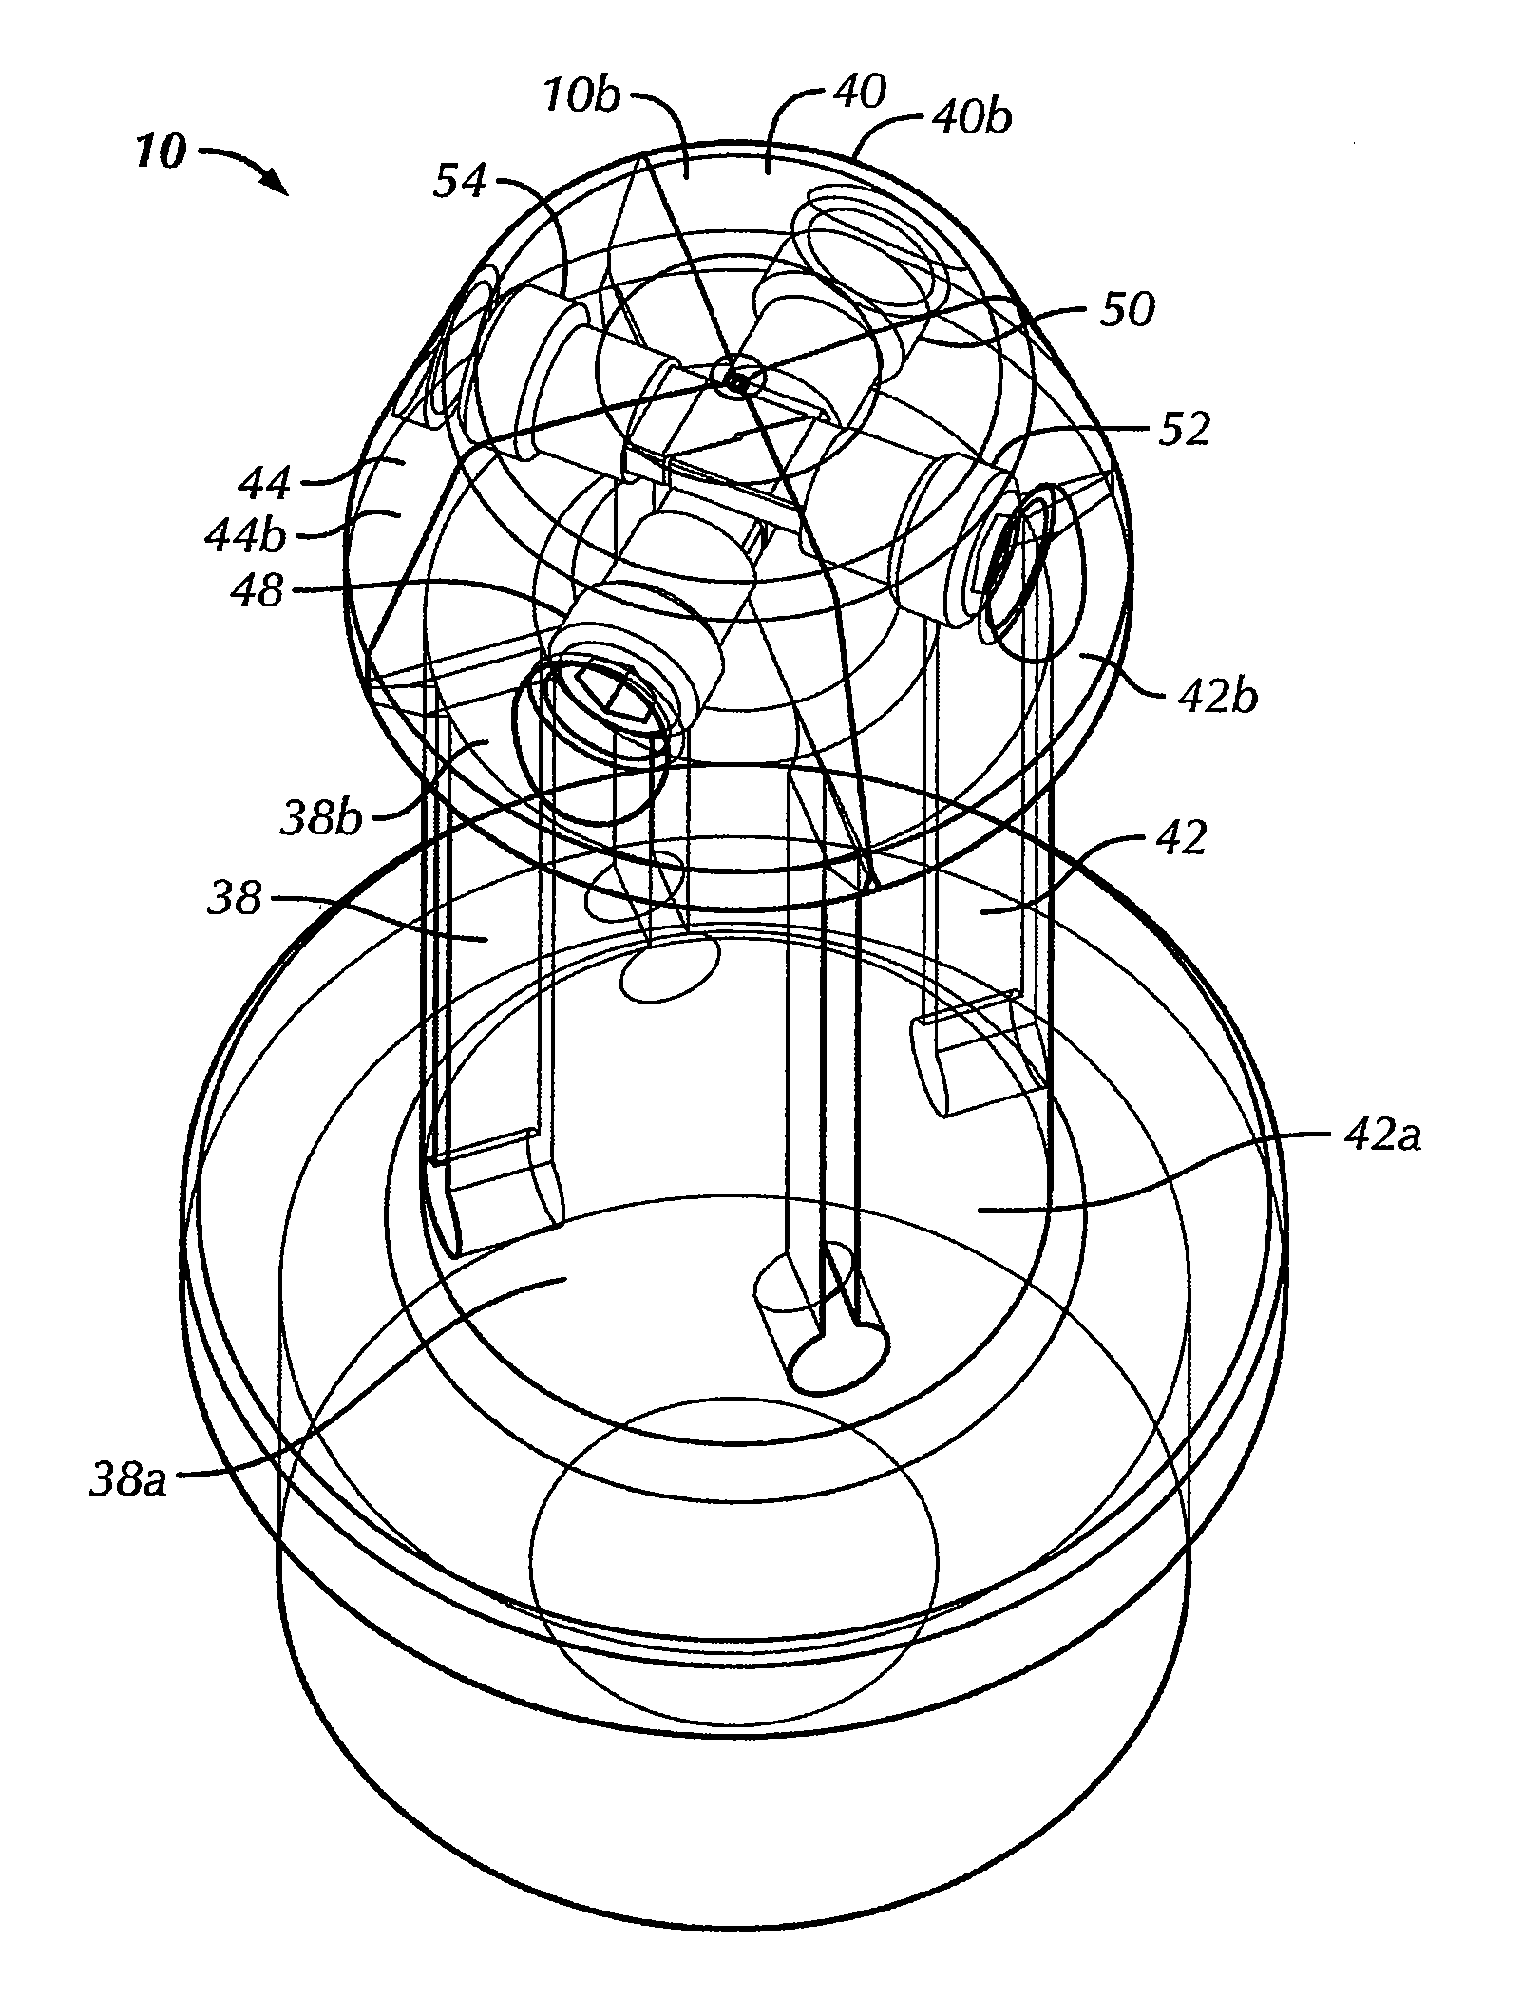 Collet mechanism and method of molding cannula to a syringe barrel